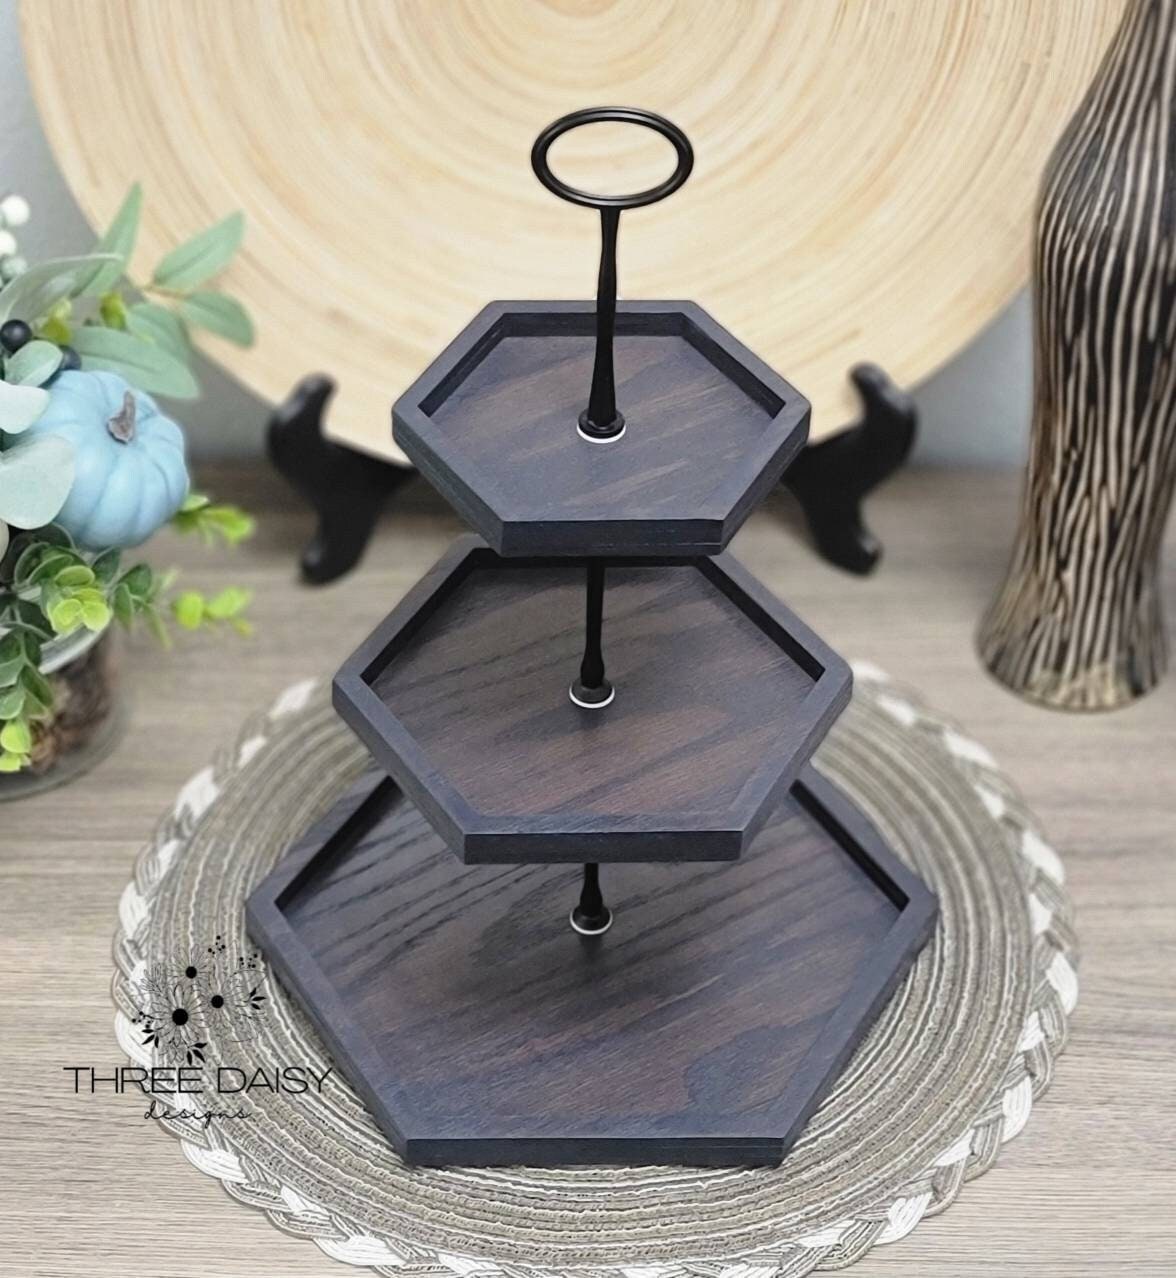 Tier Tray Easel, Small Picture Easel, Tier Tray Stand, 3 Stands, Decorative  Stands, 3 Pack, Tier Tray Decor 